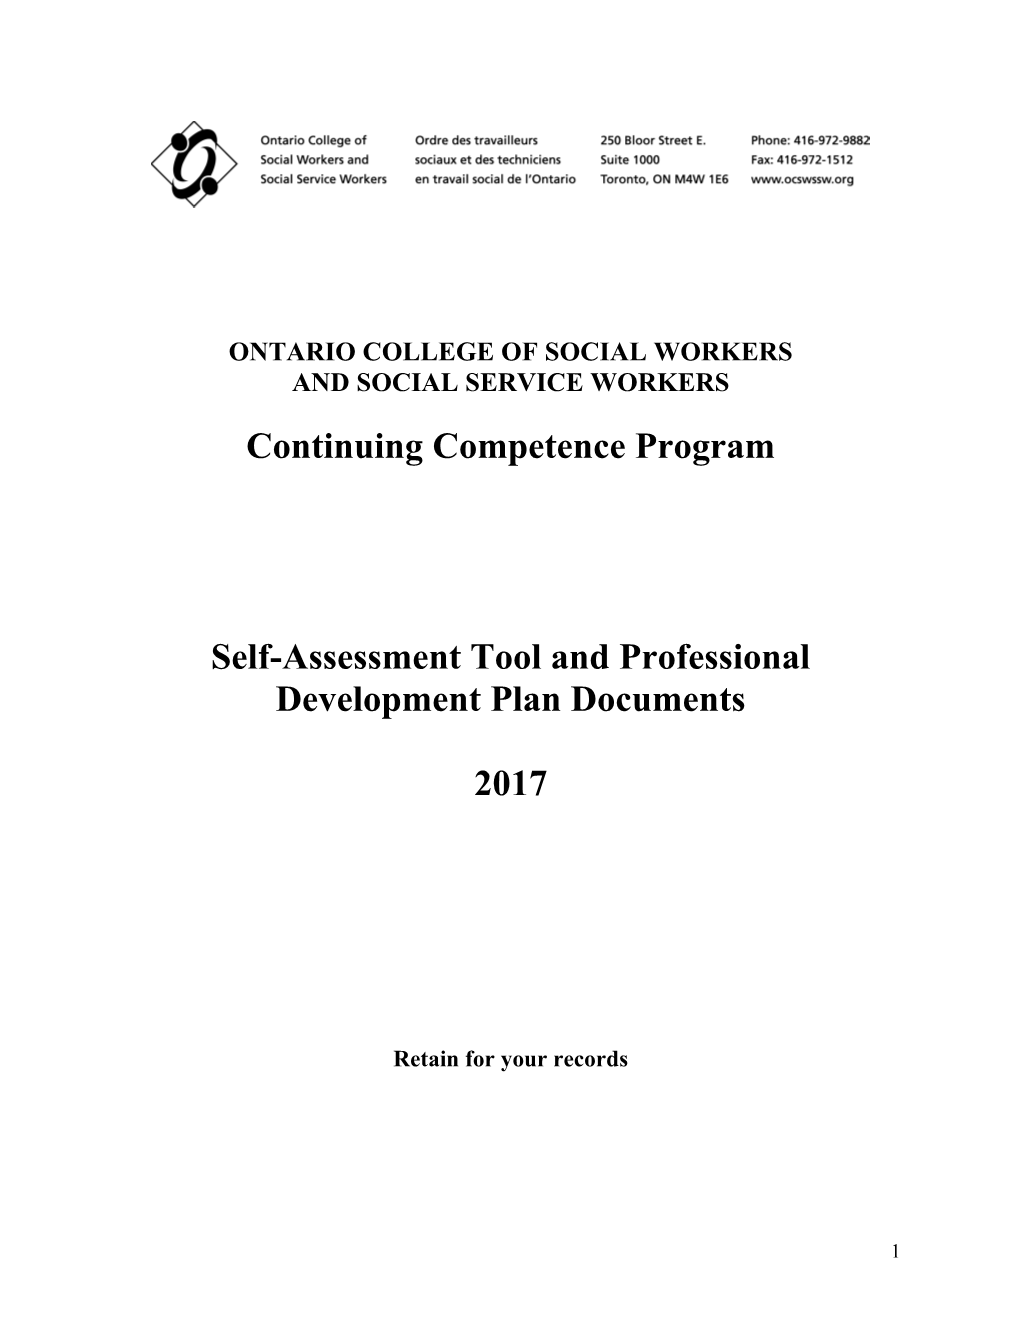 Ontario College of Social Workers